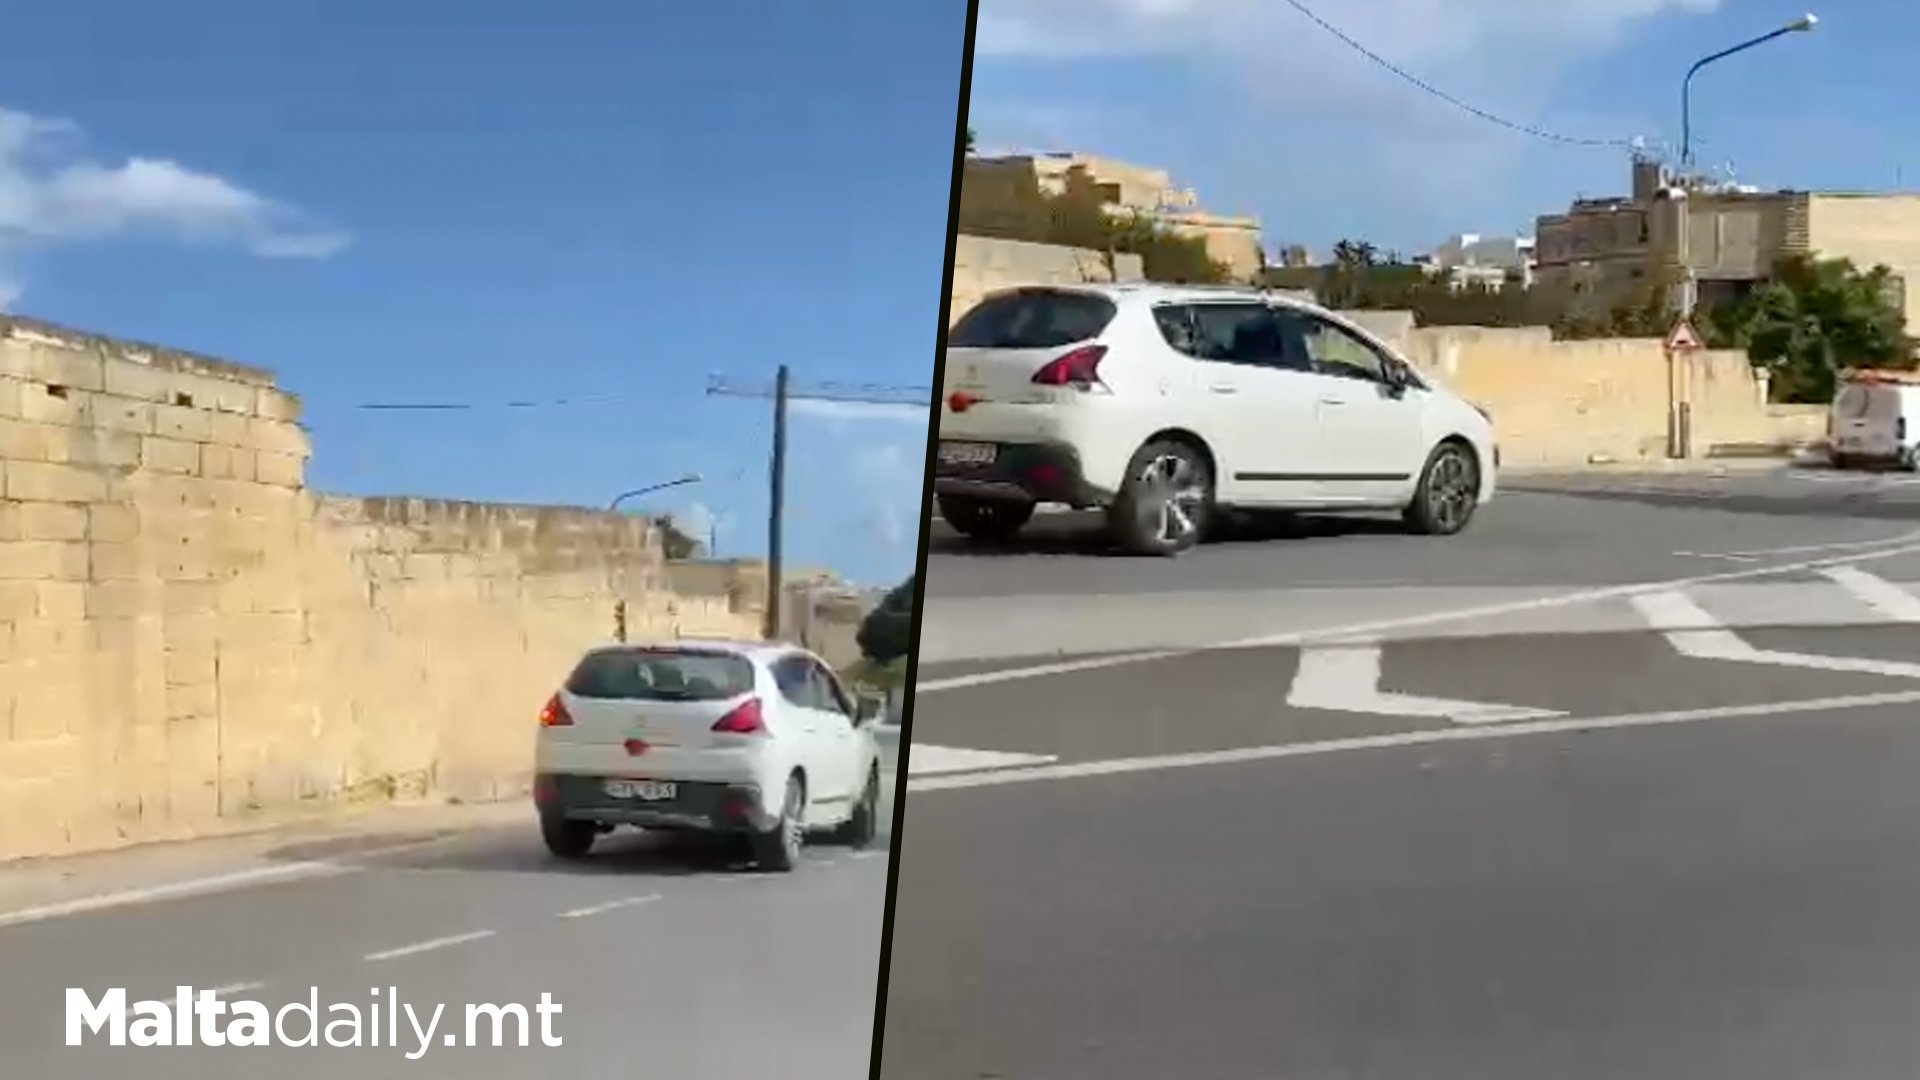 Car Dressed As Reindeer Spotted Driving Around Malta